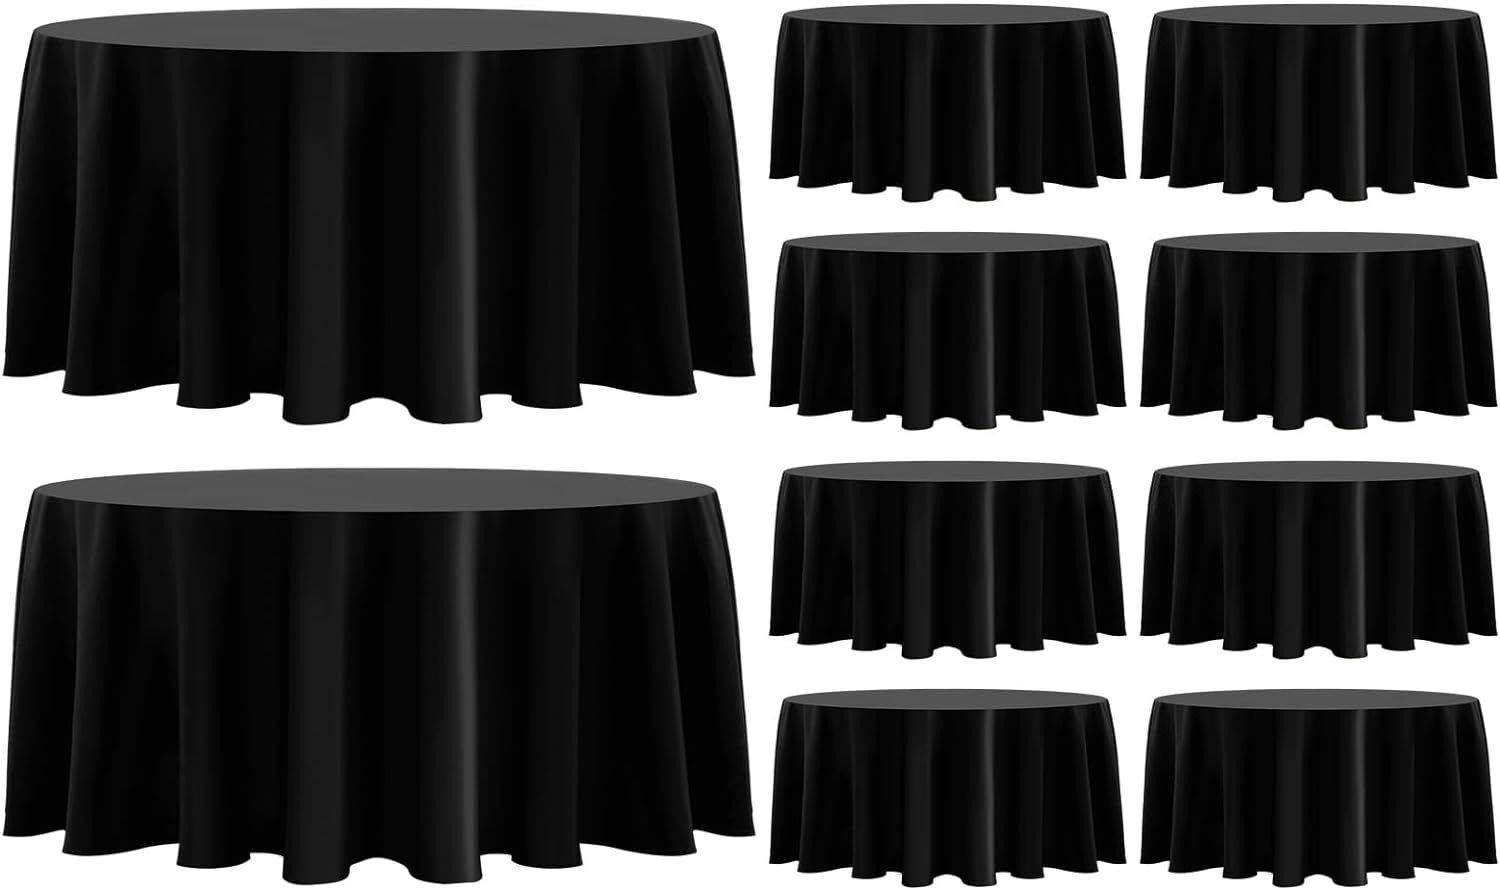 $120 10 Pack Black Round Tablecloth 120 Inch